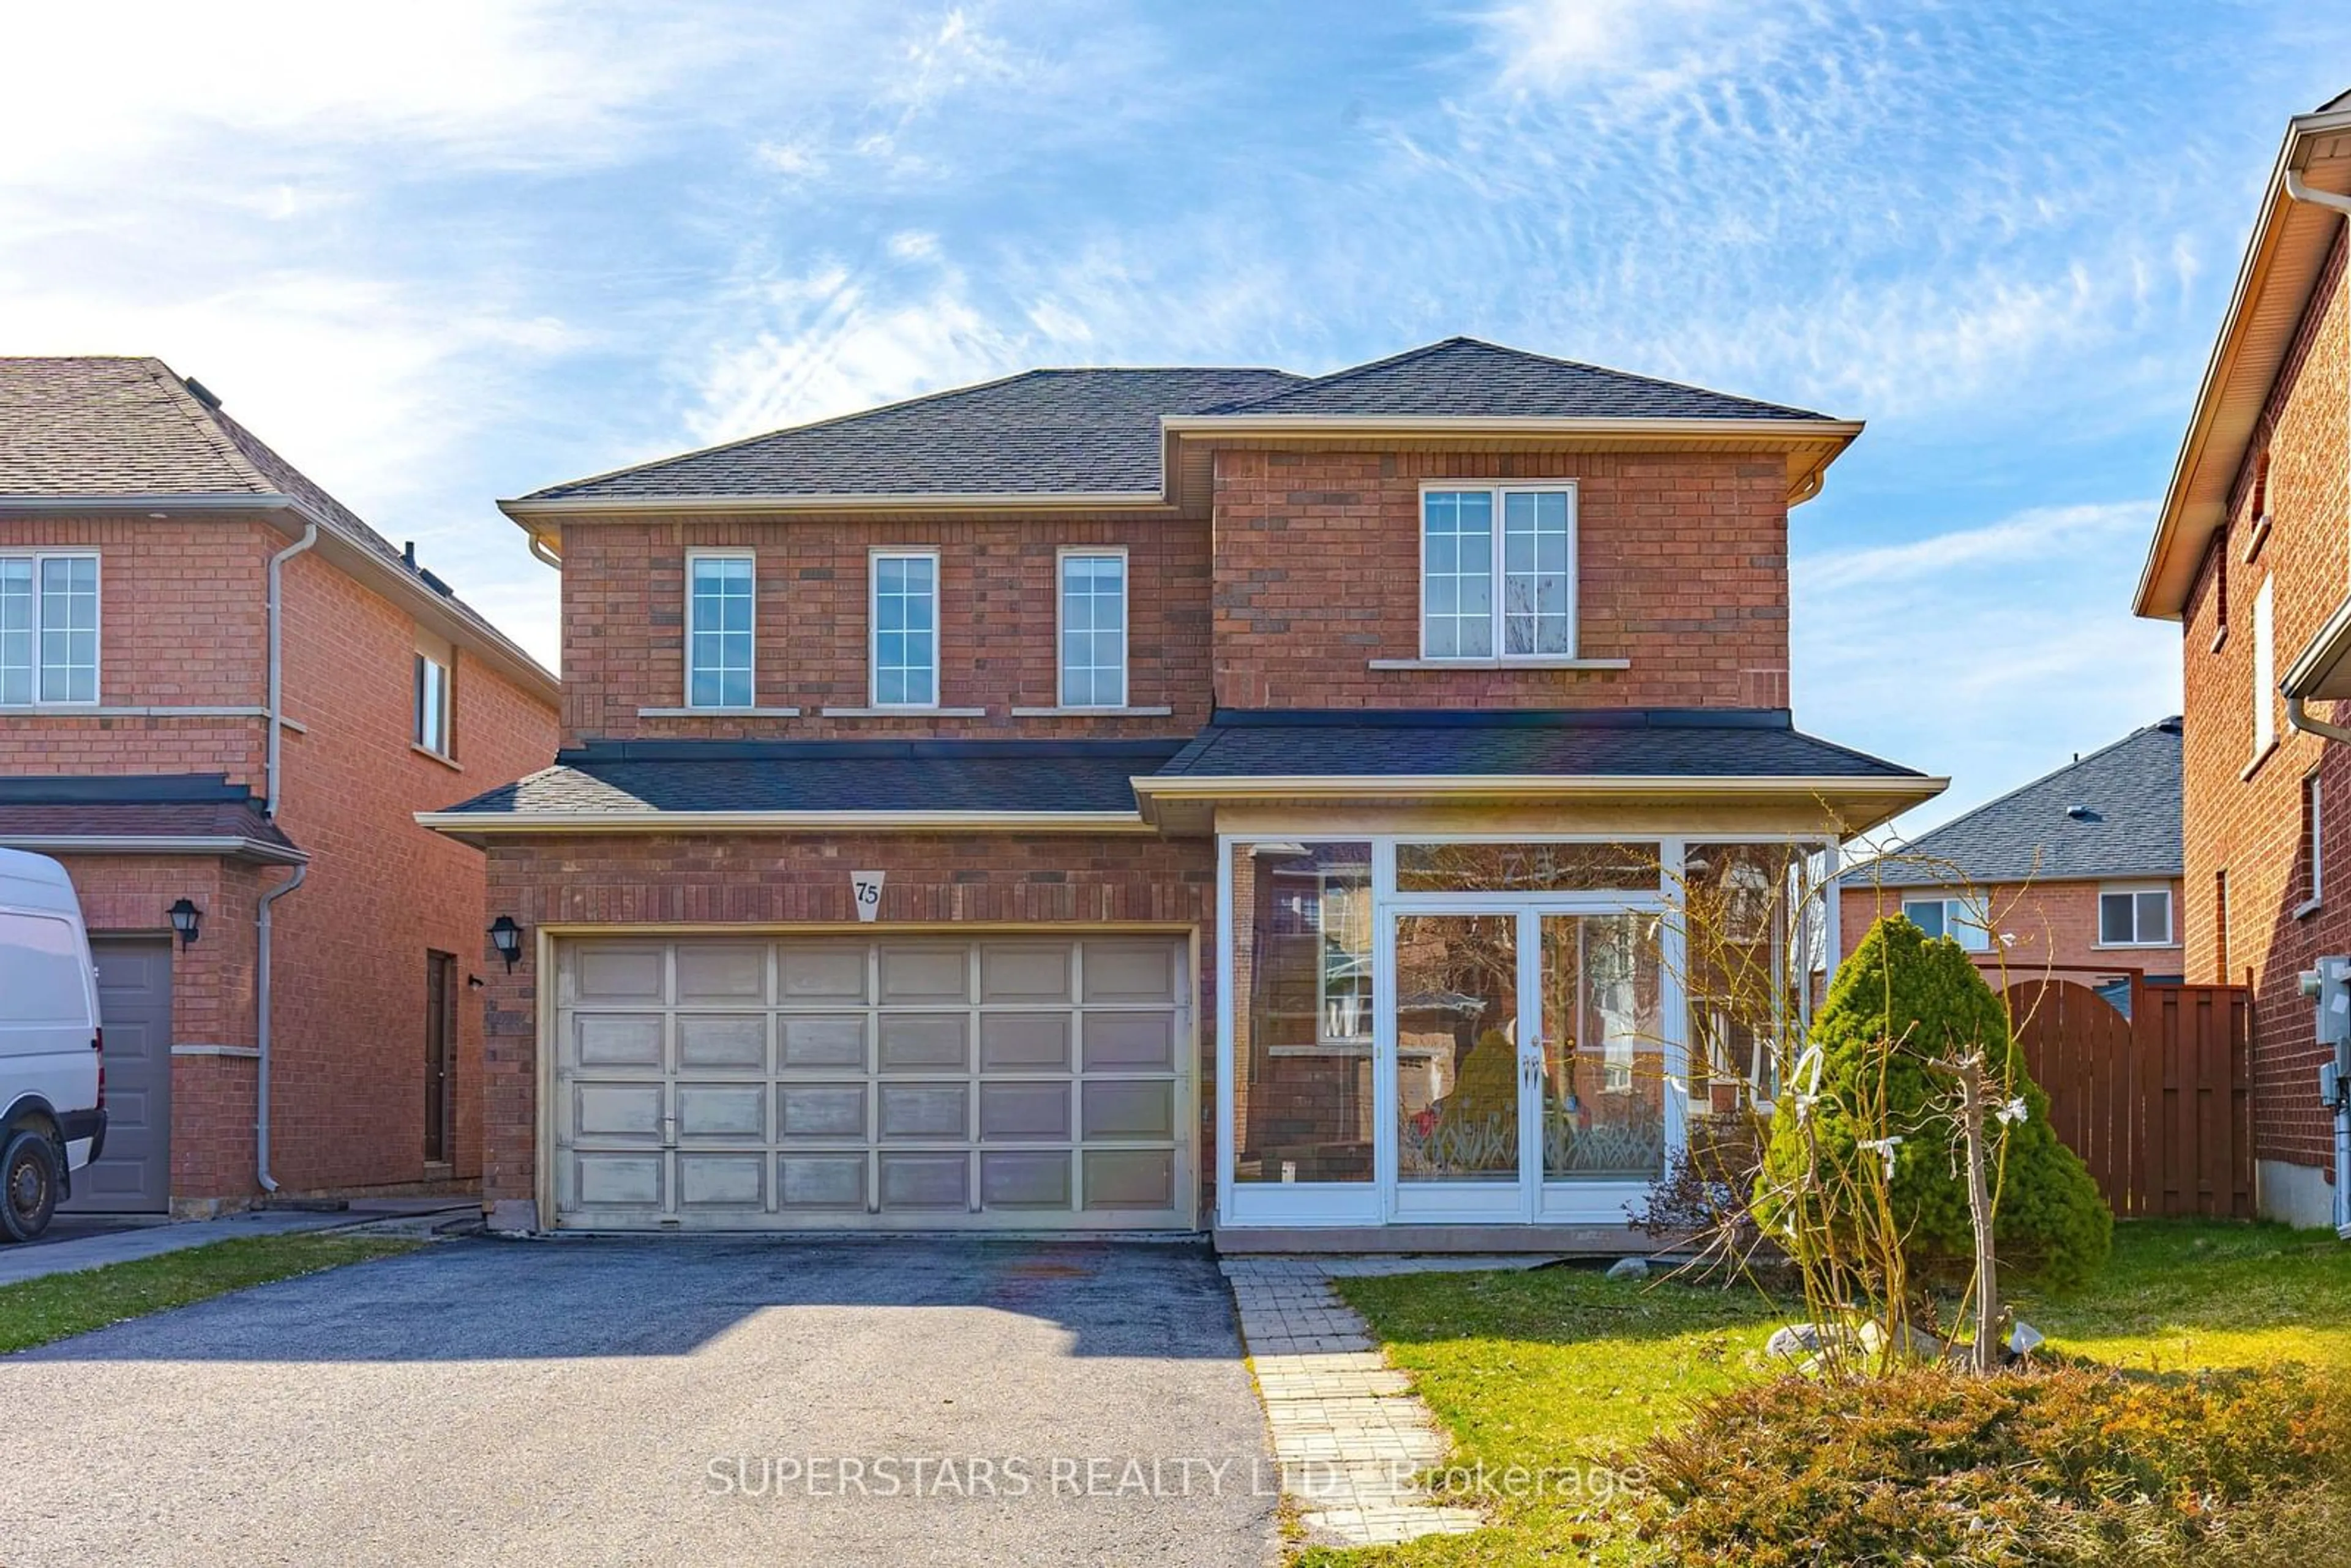 Home with brick exterior material for 75 Westchester Cres, Markham Ontario L6C 2X9